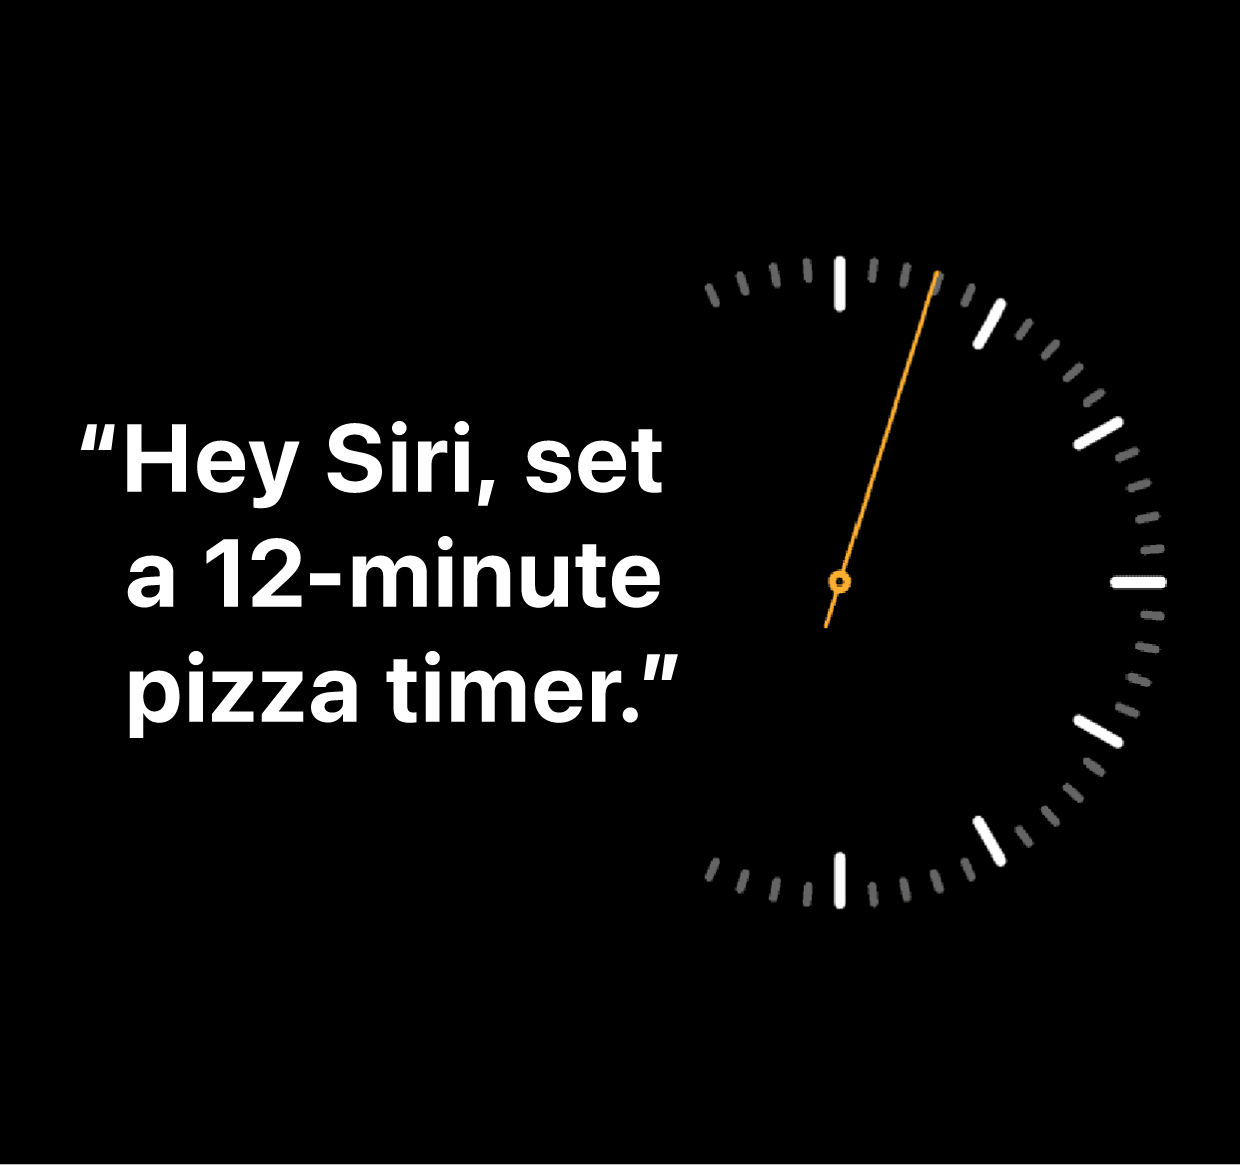 An illustration of the words “Hey Siri, set a 12-minute pizza timer”